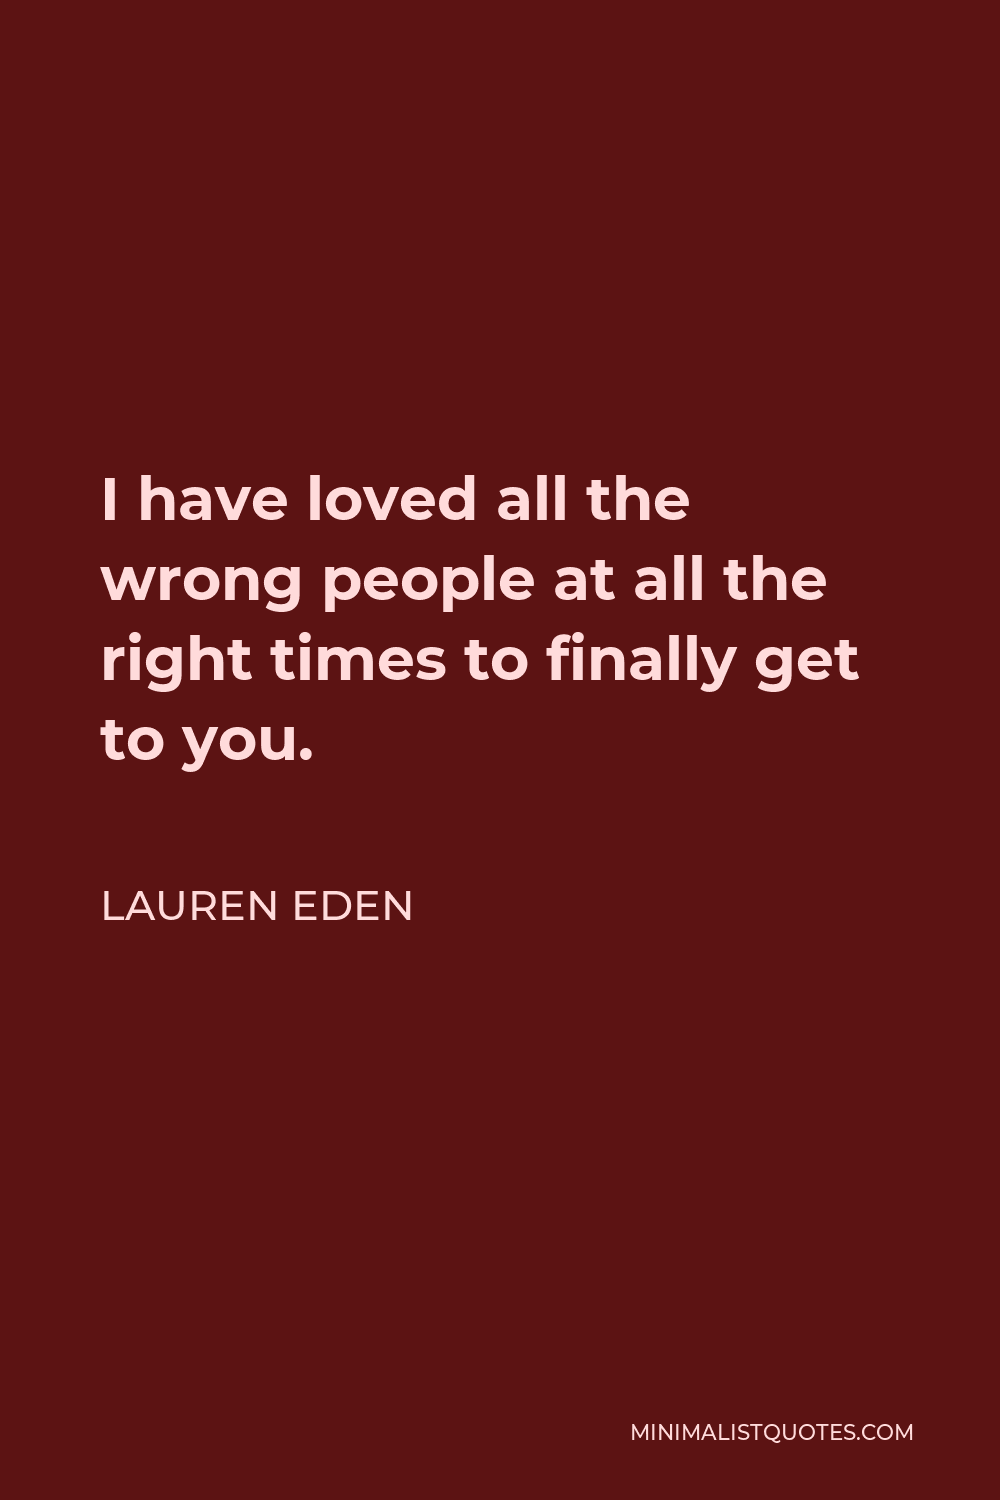 Lauren Eden Quote: I have loved all the wrong people at all the right ...